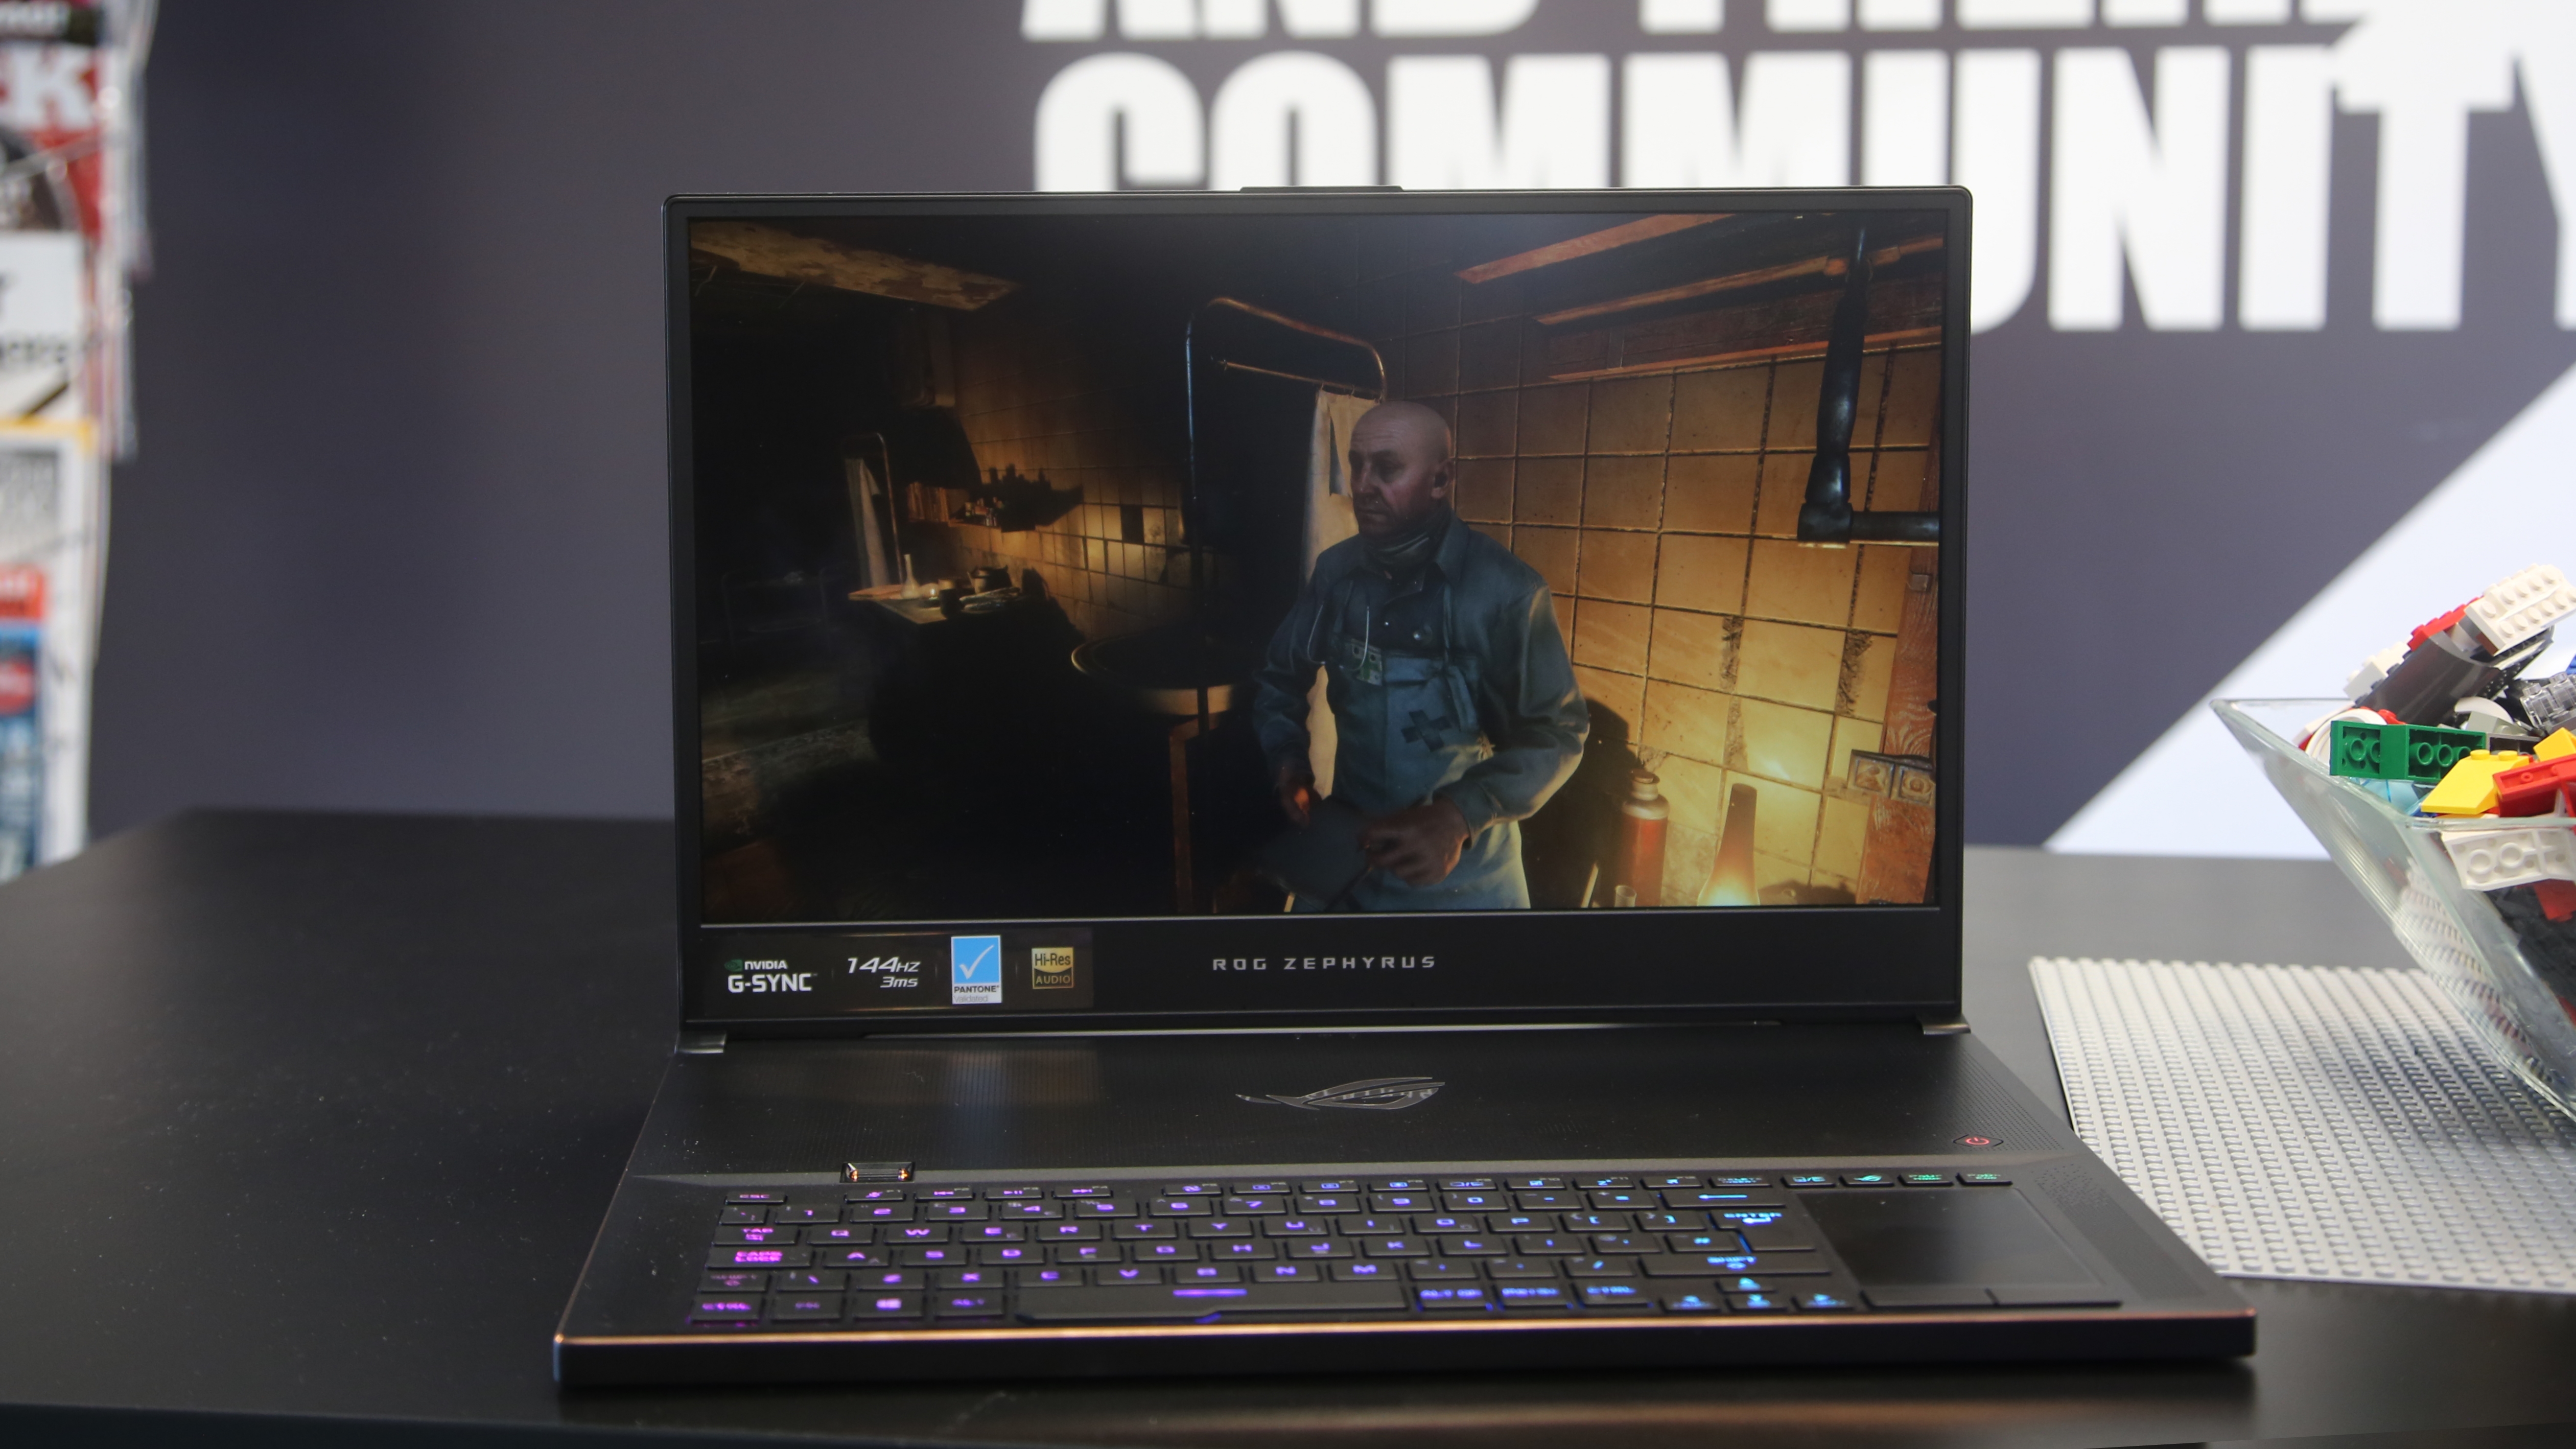 Is Asus a Good Gaming Laptop?